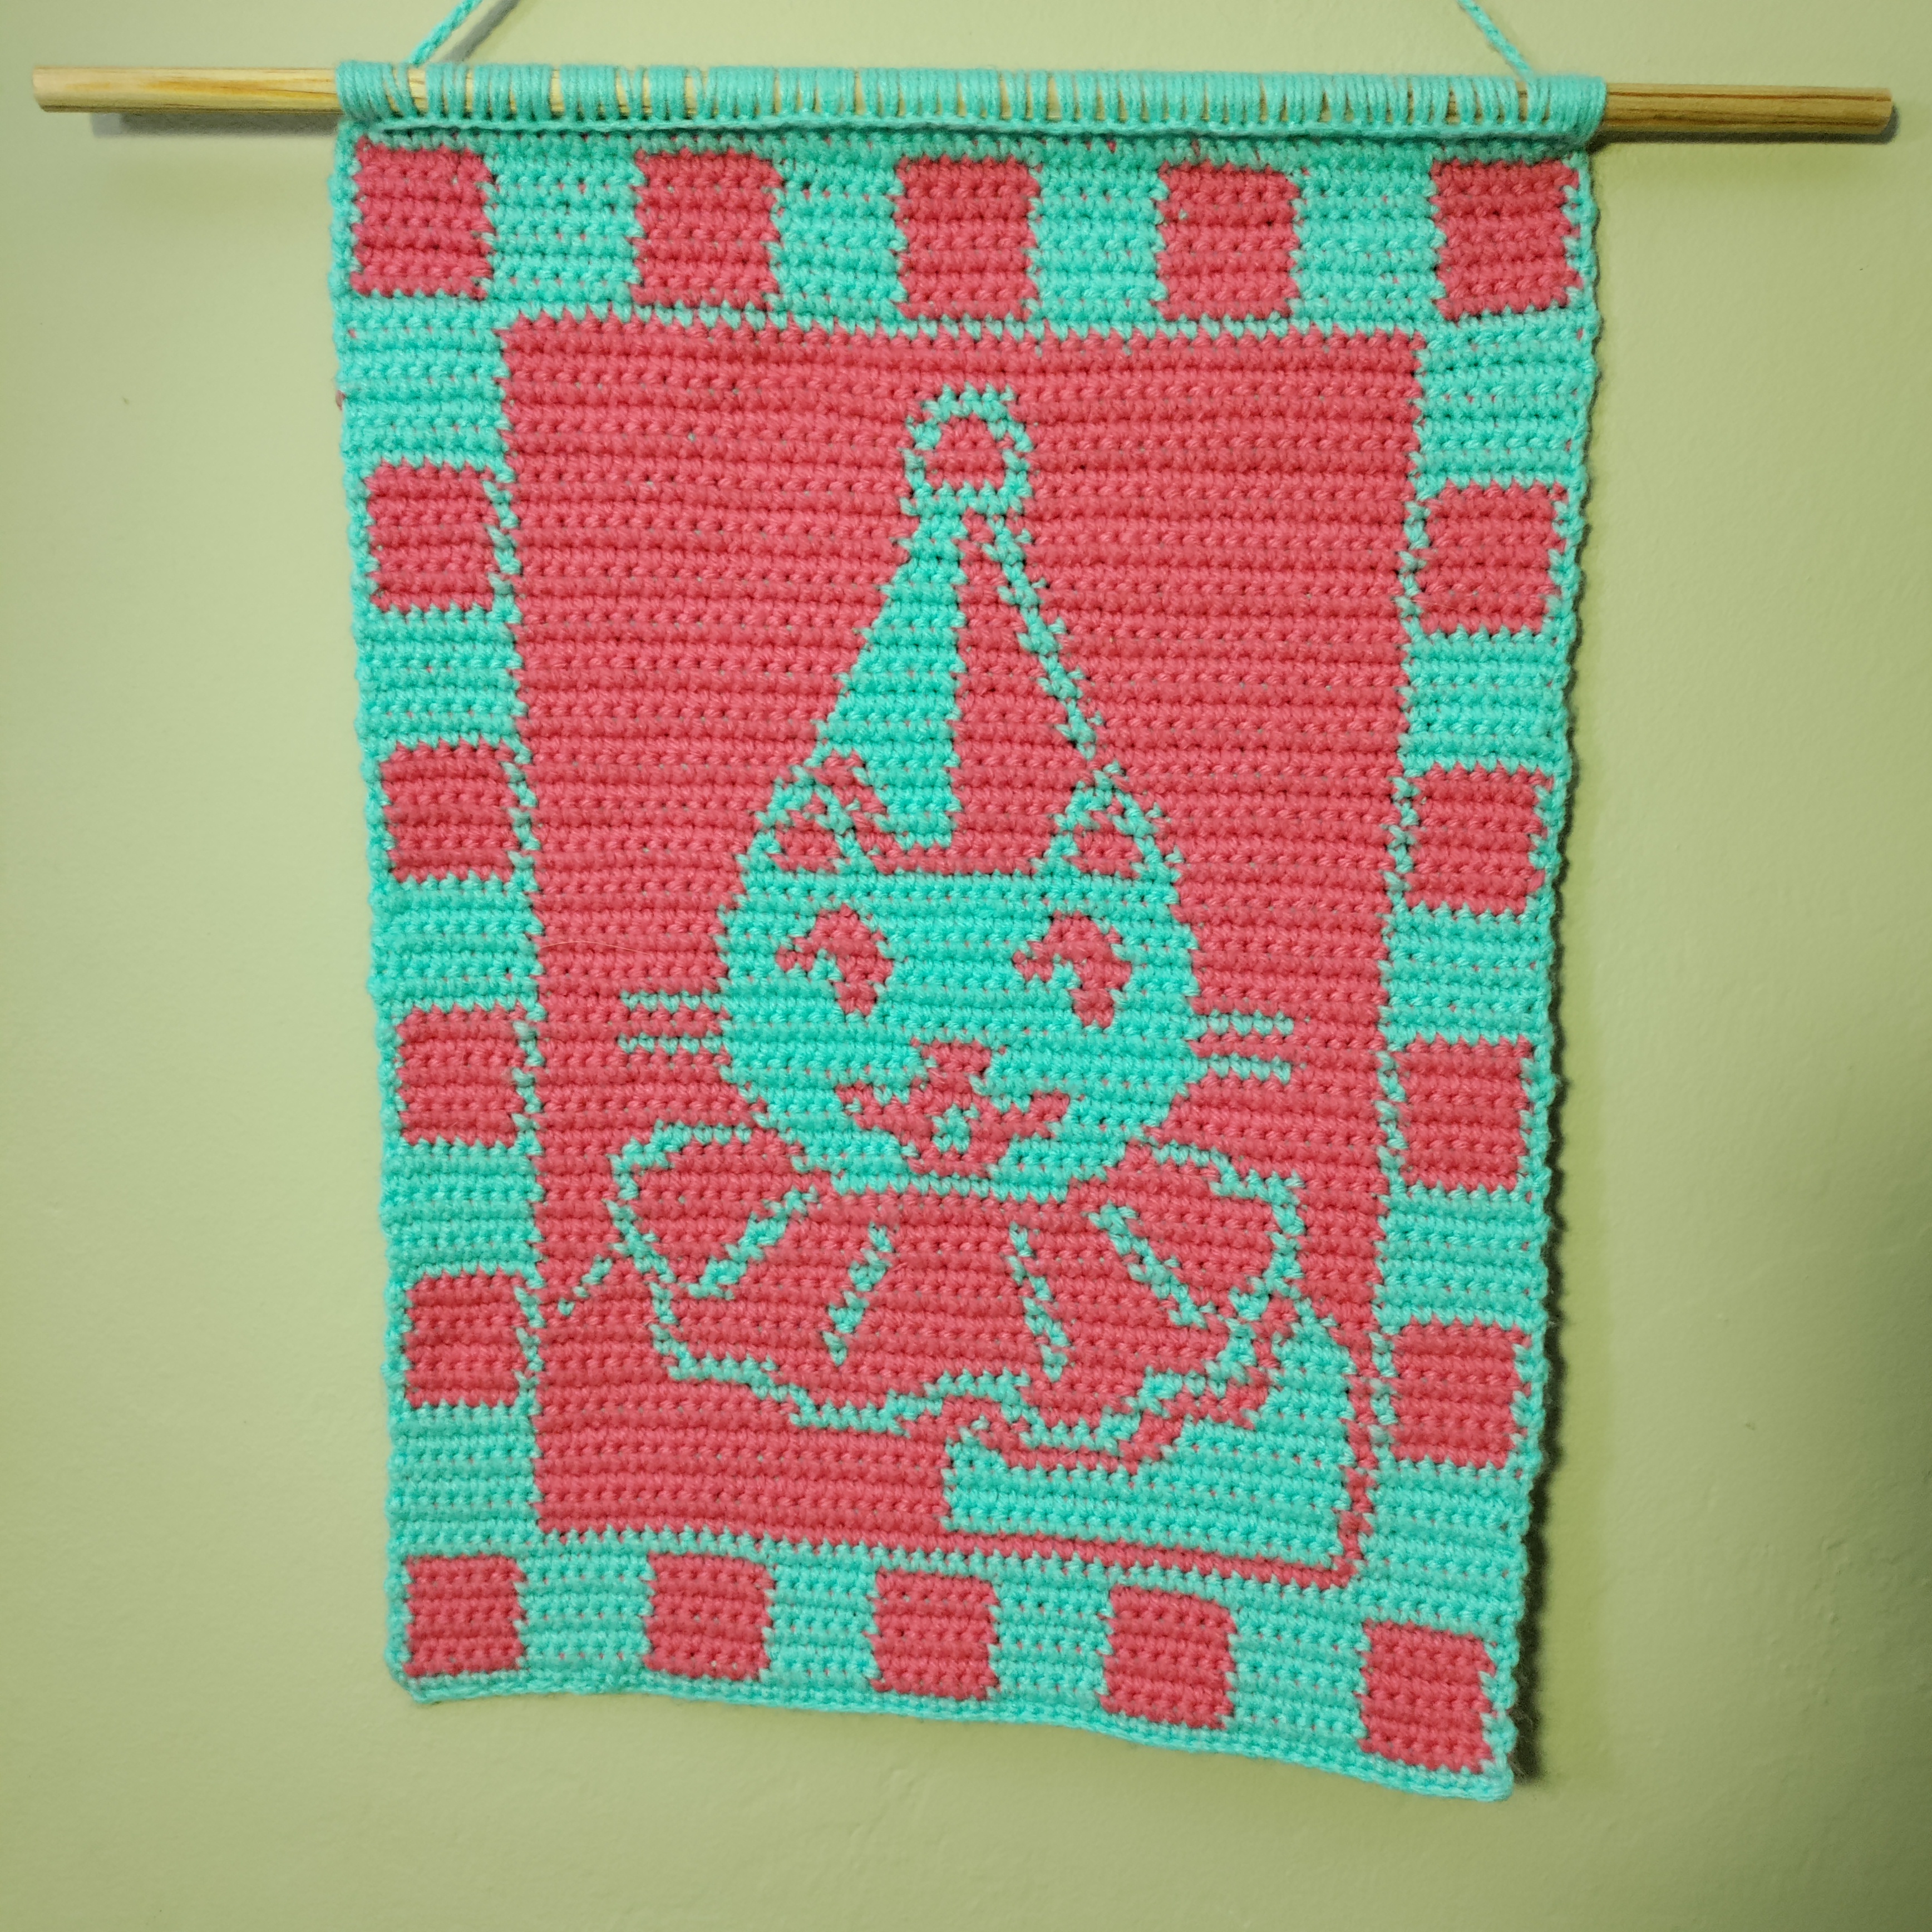 a neater looking cyan and hot pink crocheted tapestry depicting a cat in a clown outfit smiling and looking to the right, surrounded by a checkerboard border